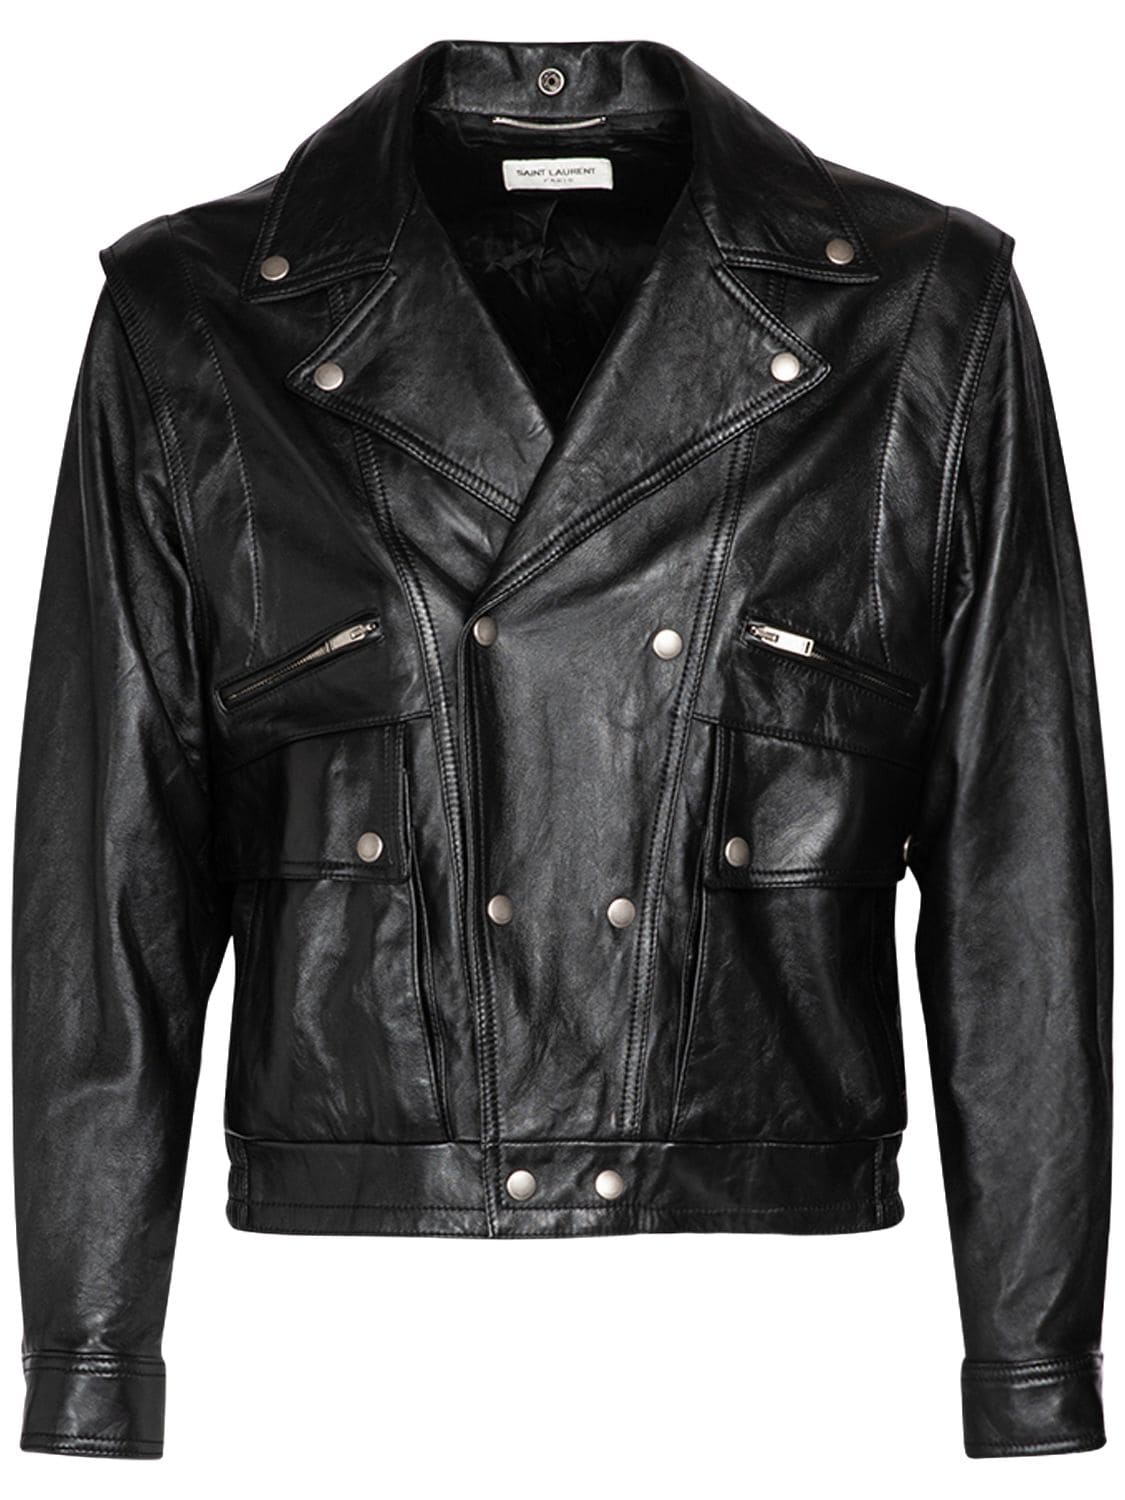 Leather Jacket W/ Detachable Sleeves | The Hoxton Trend